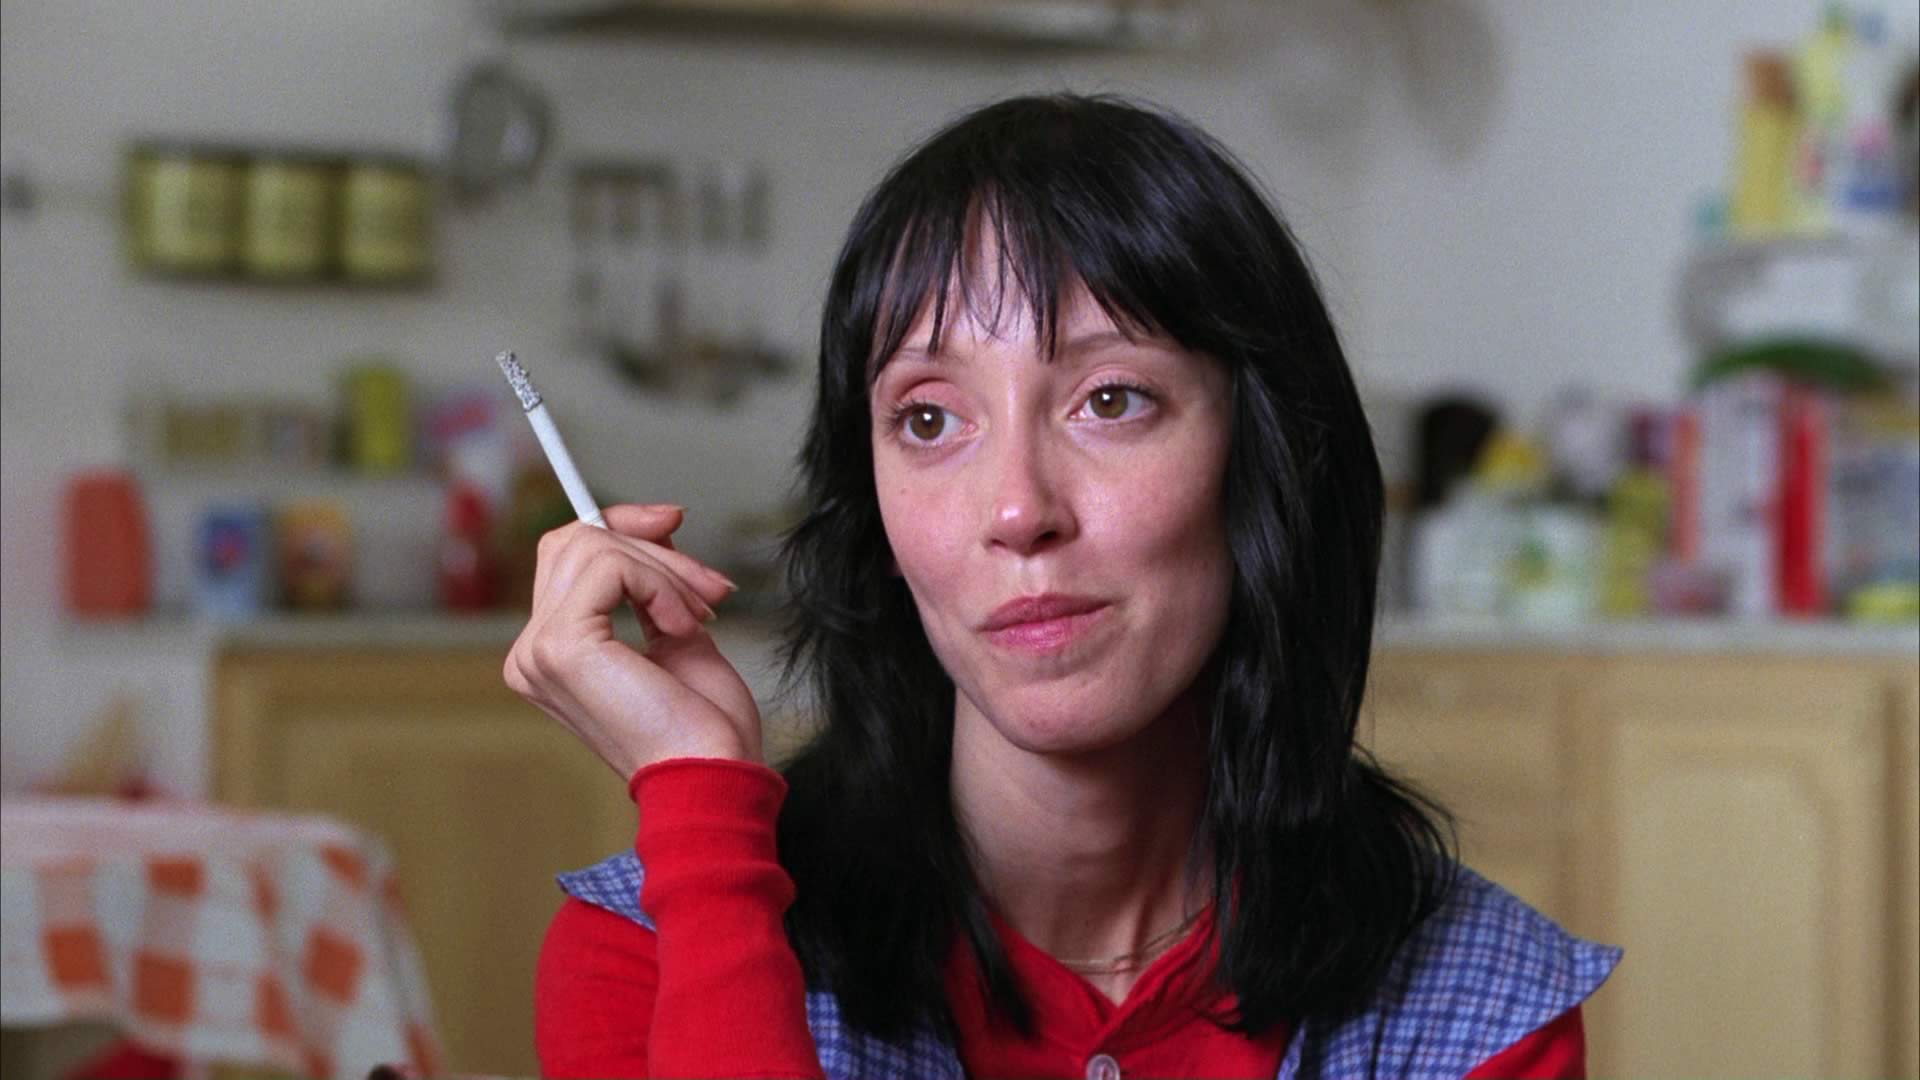 32 Facts About Shelley Duvall - Facts.net